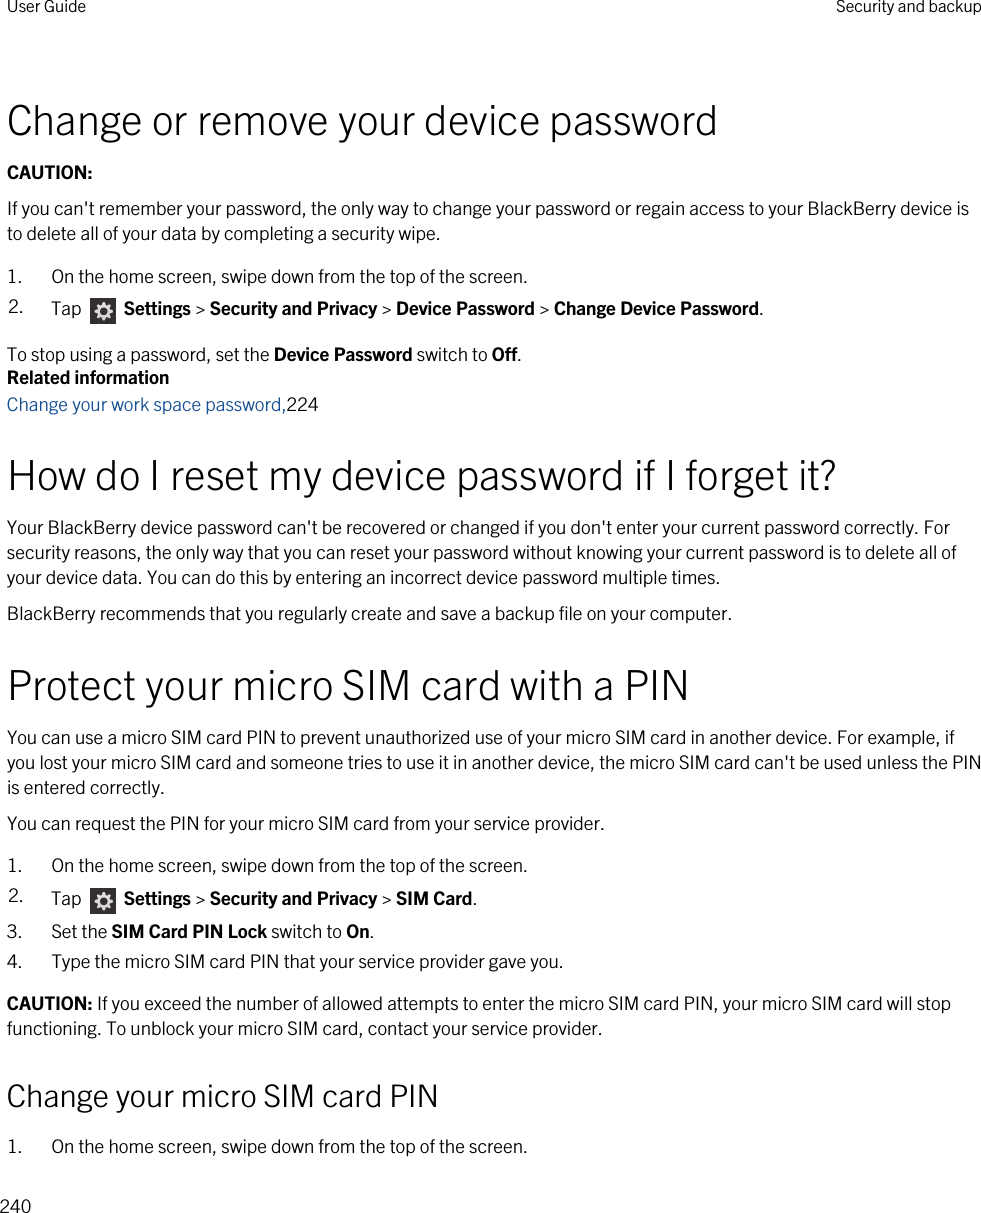 Change or remove your device passwordCAUTION: If you can&apos;t remember your password, the only way to change your password or regain access to your BlackBerry device is to delete all of your data by completing a security wipe.1. On the home screen, swipe down from the top of the screen.2. Tap   Settings &gt; Security and Privacy &gt; Device Password &gt; Change Device Password.To stop using a password, set the Device Password switch to Off.Related informationChange your work space password,224How do I reset my device password if I forget it?Your BlackBerry device password can&apos;t be recovered or changed if you don&apos;t enter your current password correctly. For security reasons, the only way that you can reset your password without knowing your current password is to delete all of your device data. You can do this by entering an incorrect device password multiple times.BlackBerry recommends that you regularly create and save a backup file on your computer.Protect your micro SIM card with a PINYou can use a micro SIM card PIN to prevent unauthorized use of your micro SIM card in another device. For example, if you lost your micro SIM card and someone tries to use it in another device, the micro SIM card can&apos;t be used unless the PIN is entered correctly.You can request the PIN for your micro SIM card from your service provider.1. On the home screen, swipe down from the top of the screen.2. Tap   Settings &gt; Security and Privacy &gt; SIM Card.3. Set the SIM Card PIN Lock switch to On.4. Type the micro SIM card PIN that your service provider gave you.CAUTION: If you exceed the number of allowed attempts to enter the micro SIM card PIN, your micro SIM card will stop functioning. To unblock your micro SIM card, contact your service provider.Change your micro SIM card PIN1. On the home screen, swipe down from the top of the screen.User Guide Security and backup240